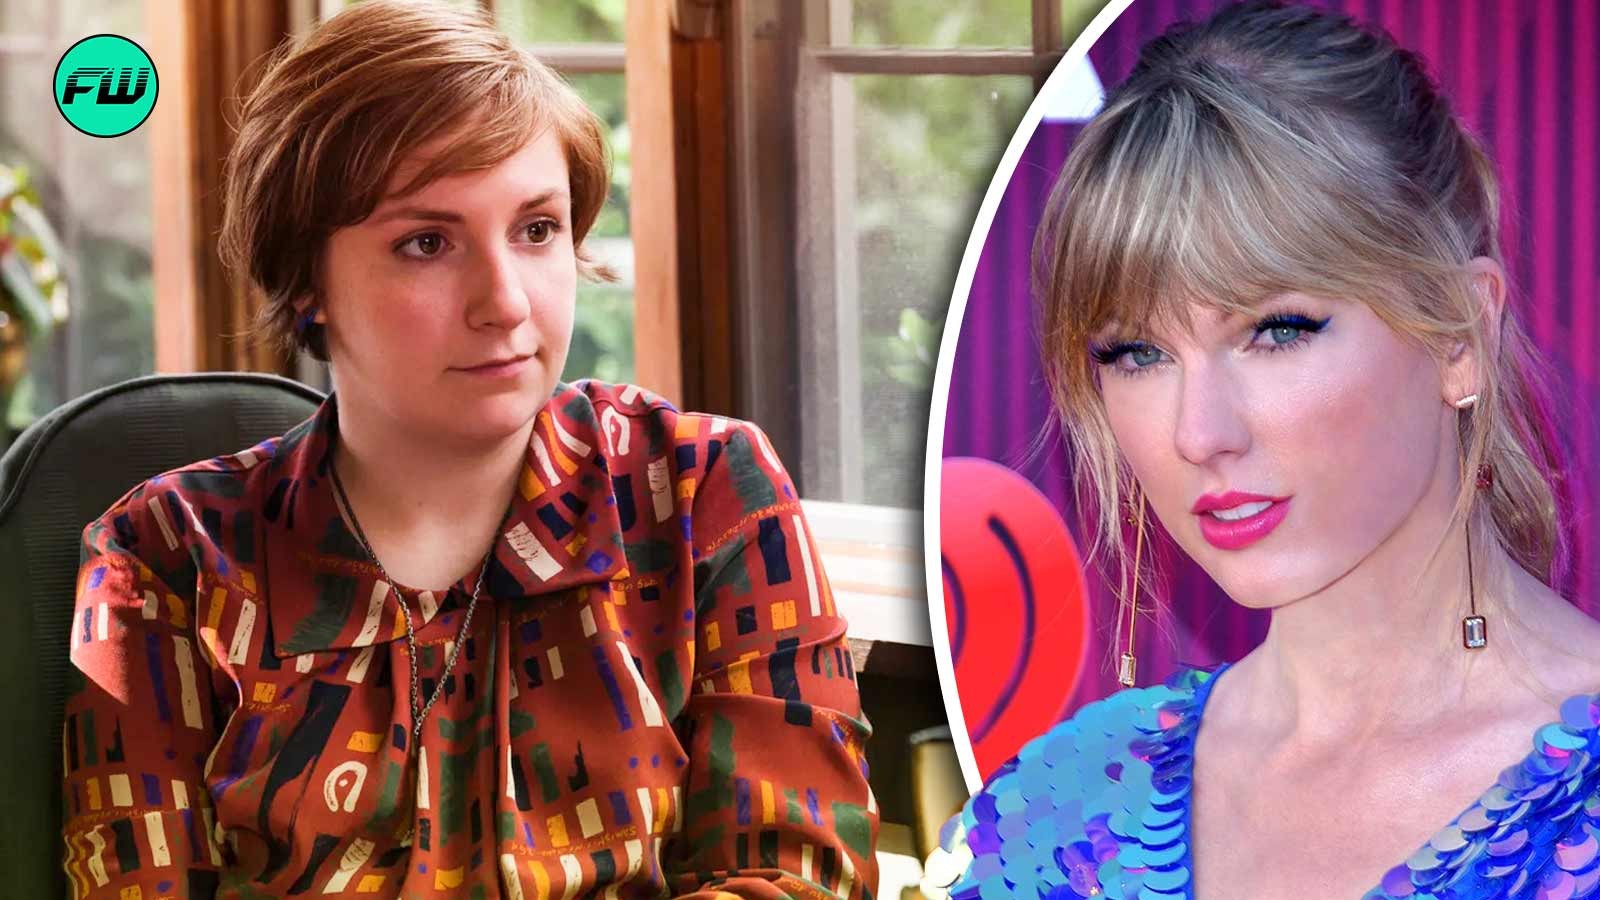 Lena Dunham, friends with Taylor Swift for 12 years, reveals why she rarely talks about her friendship with the singer